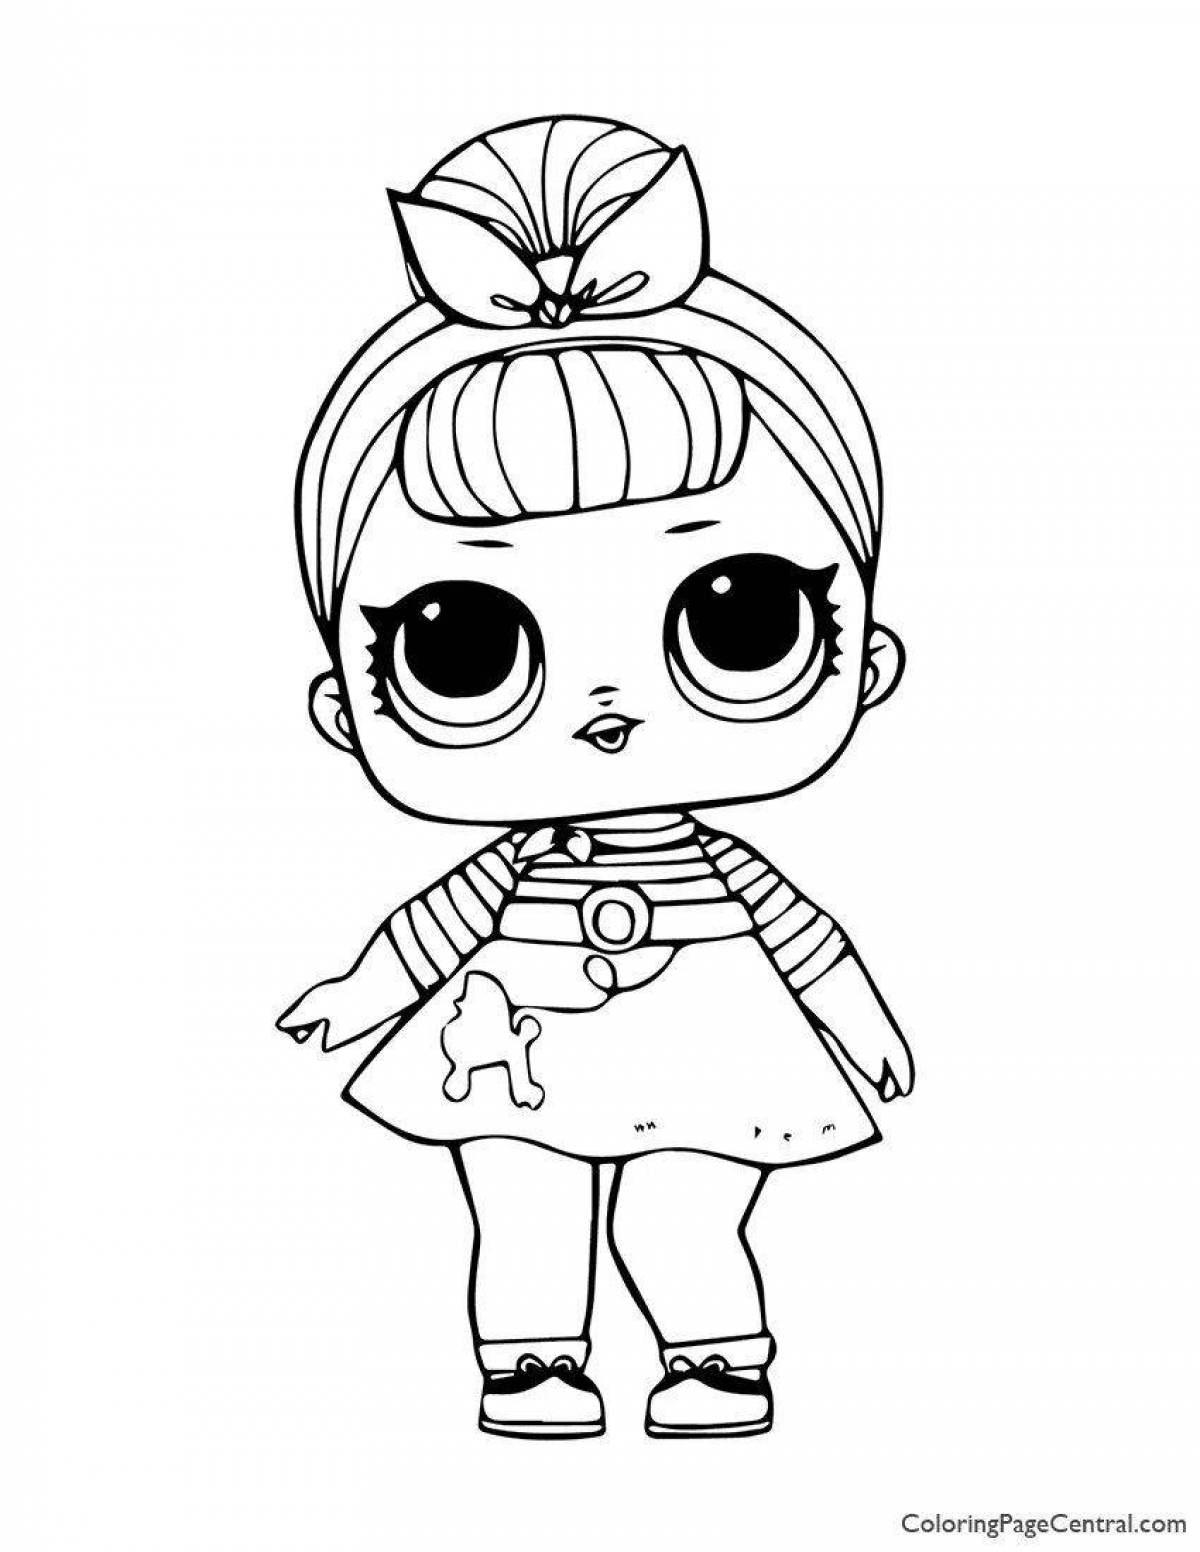 Sparkly lol blot doll coloring book